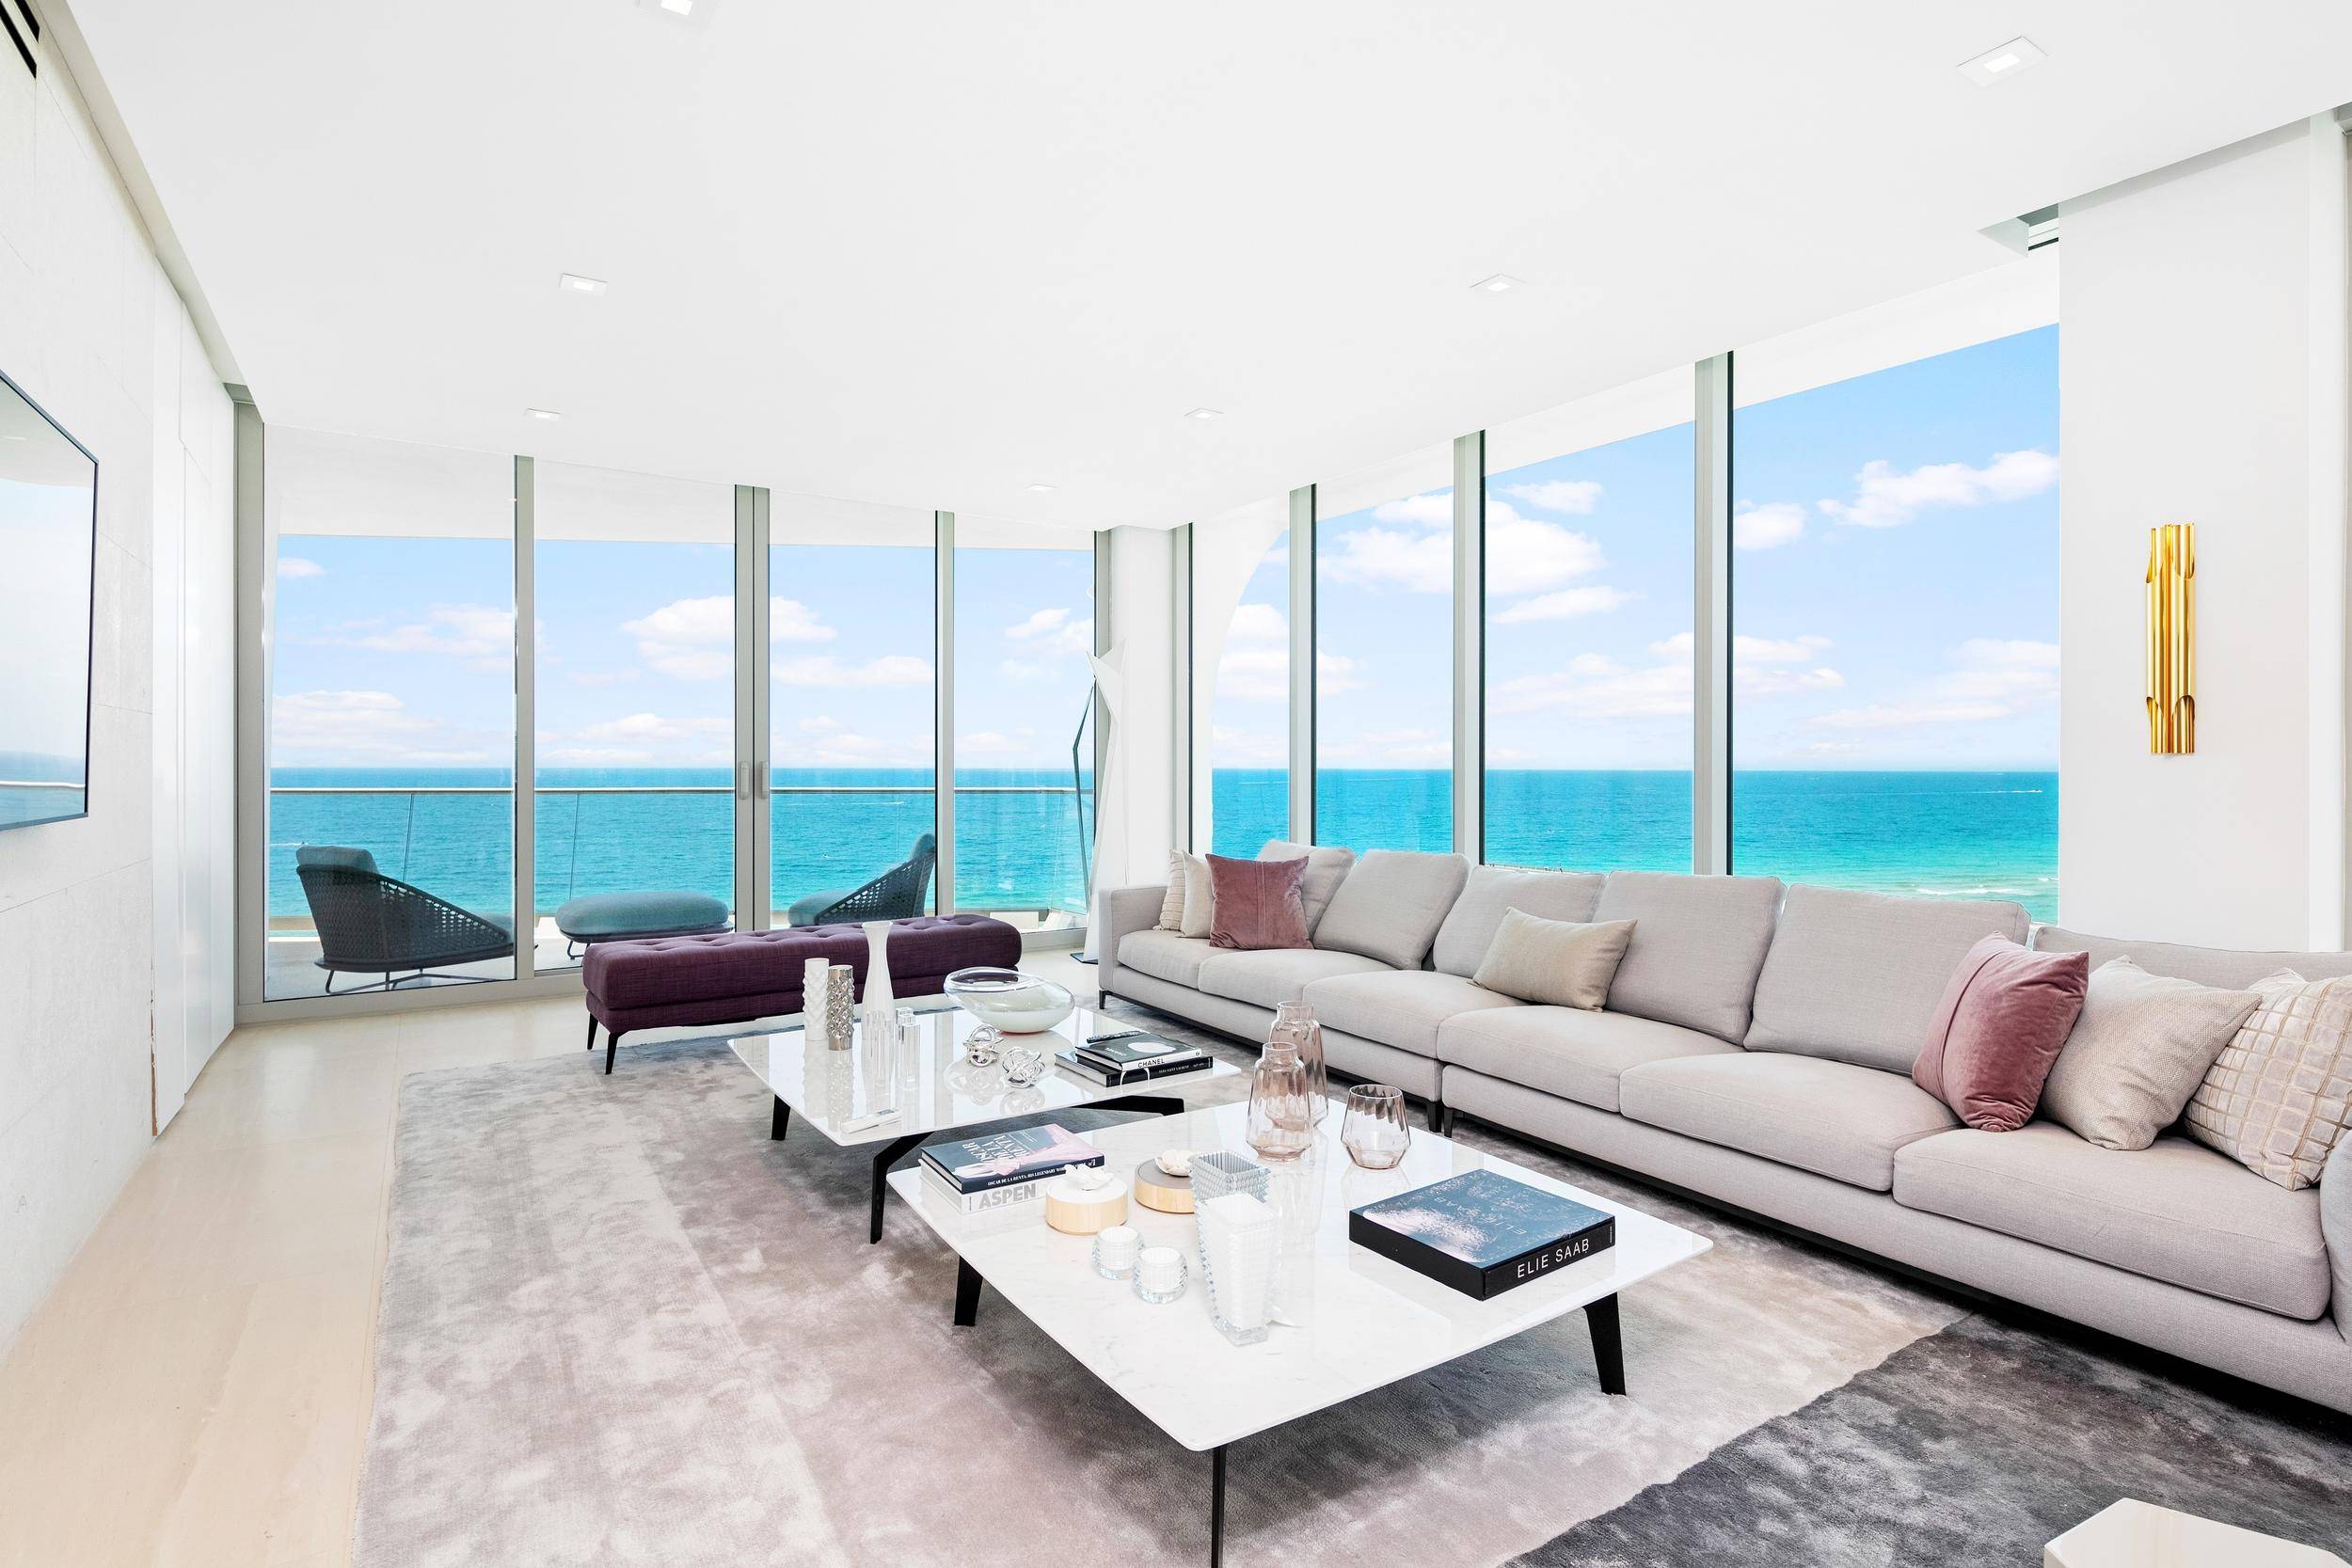 Jade Signature has reimagined the residential landscape in South Florida with its towering 57 story oceanfront splendor.